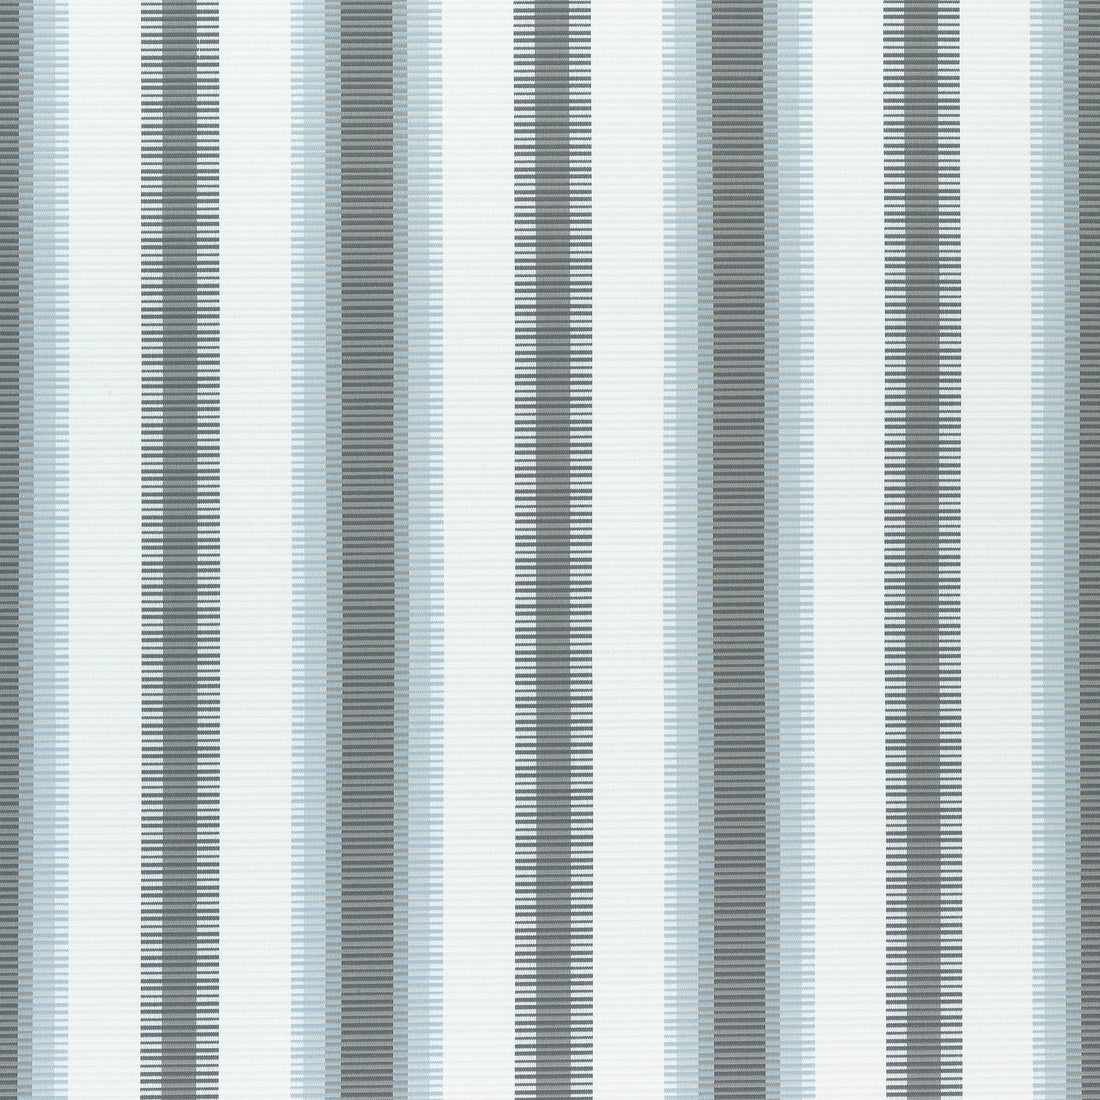 Samba Stripe fabric in charcoal and mineral color - pattern number W74667 - by Thibaut in the Festival collection